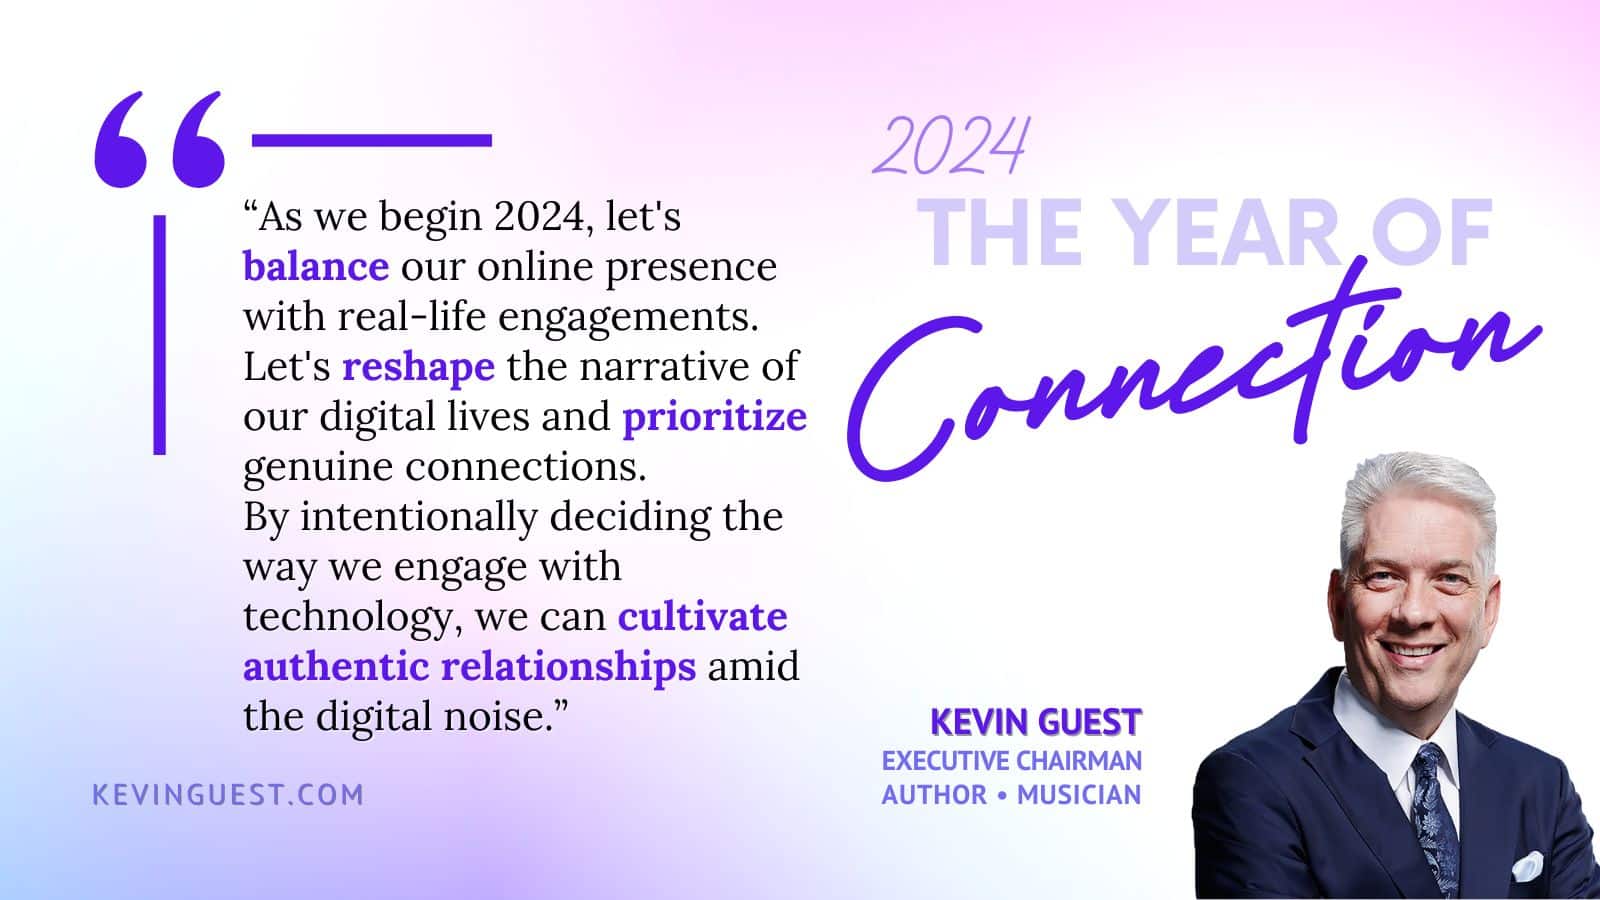 Make 2024 The Year of Connection